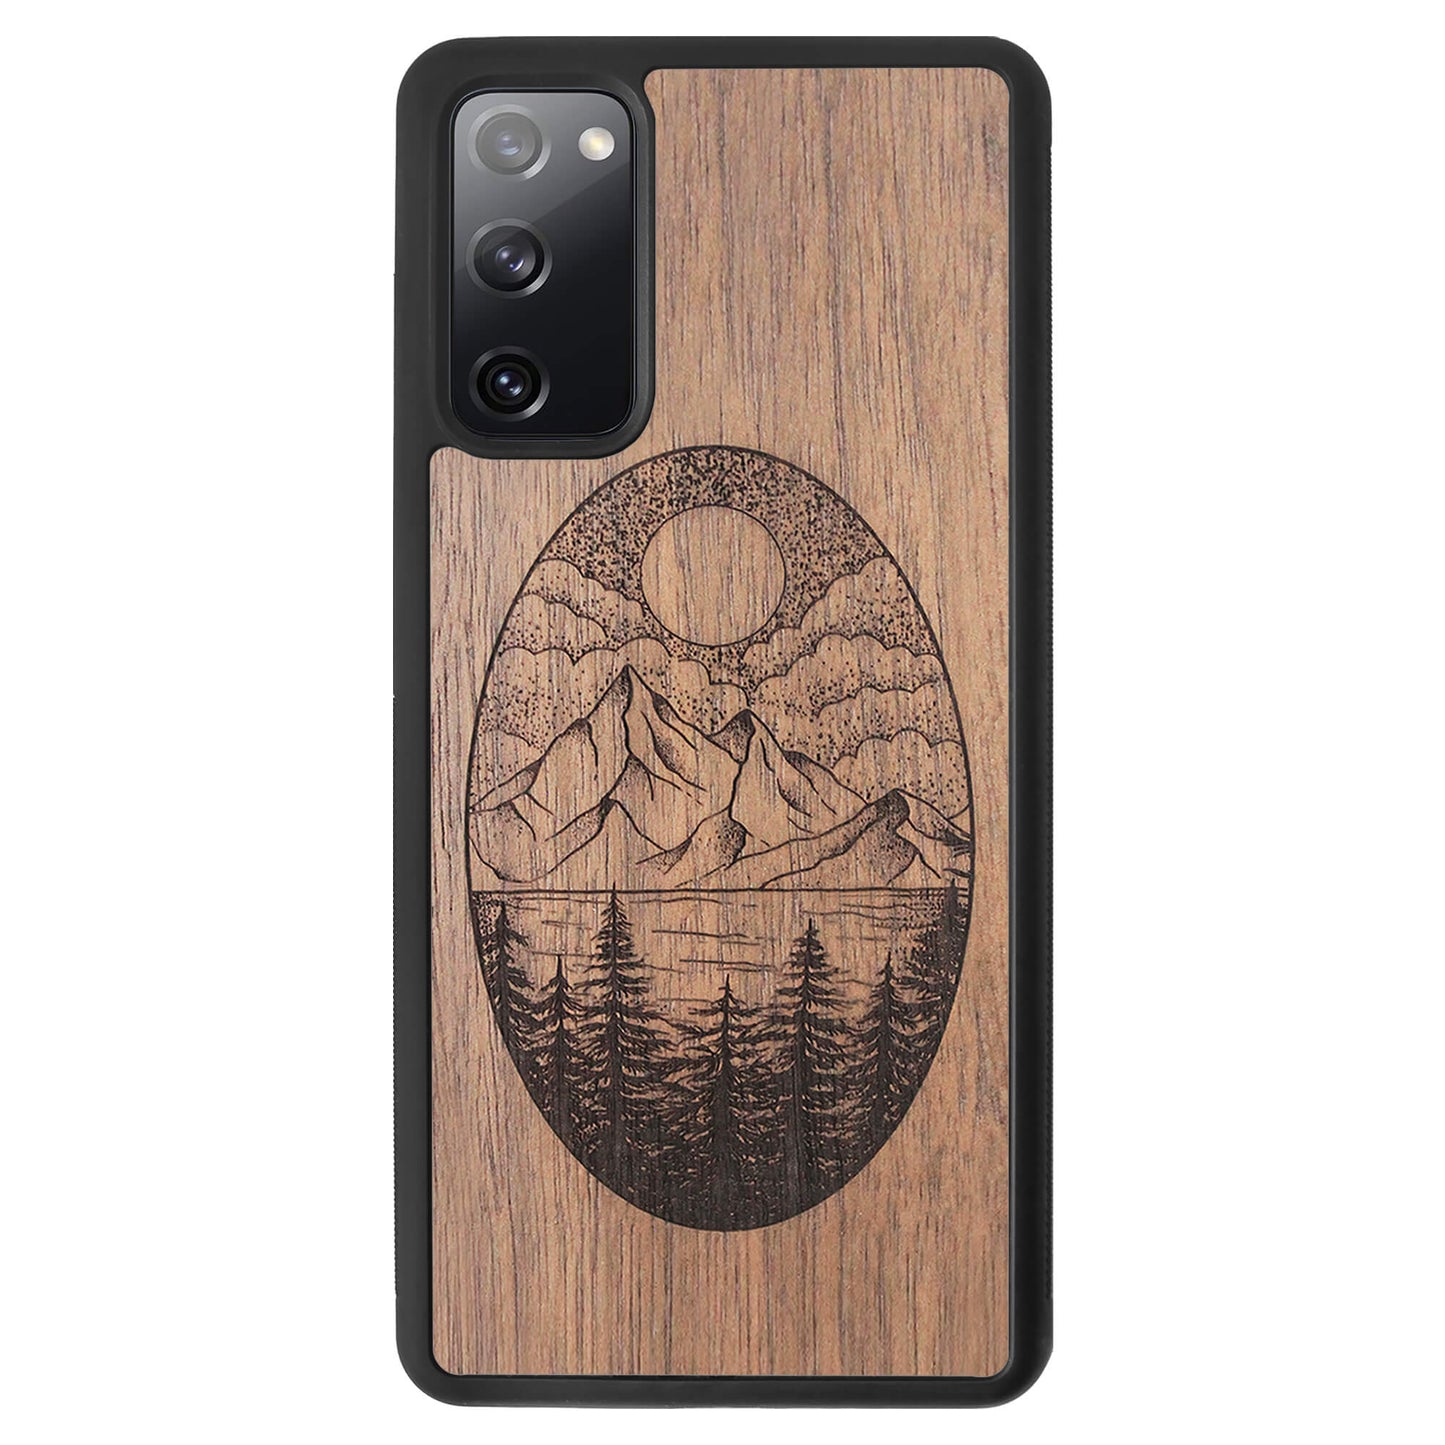 Wooden Case for Samsung Galaxy S20 FE Landscape